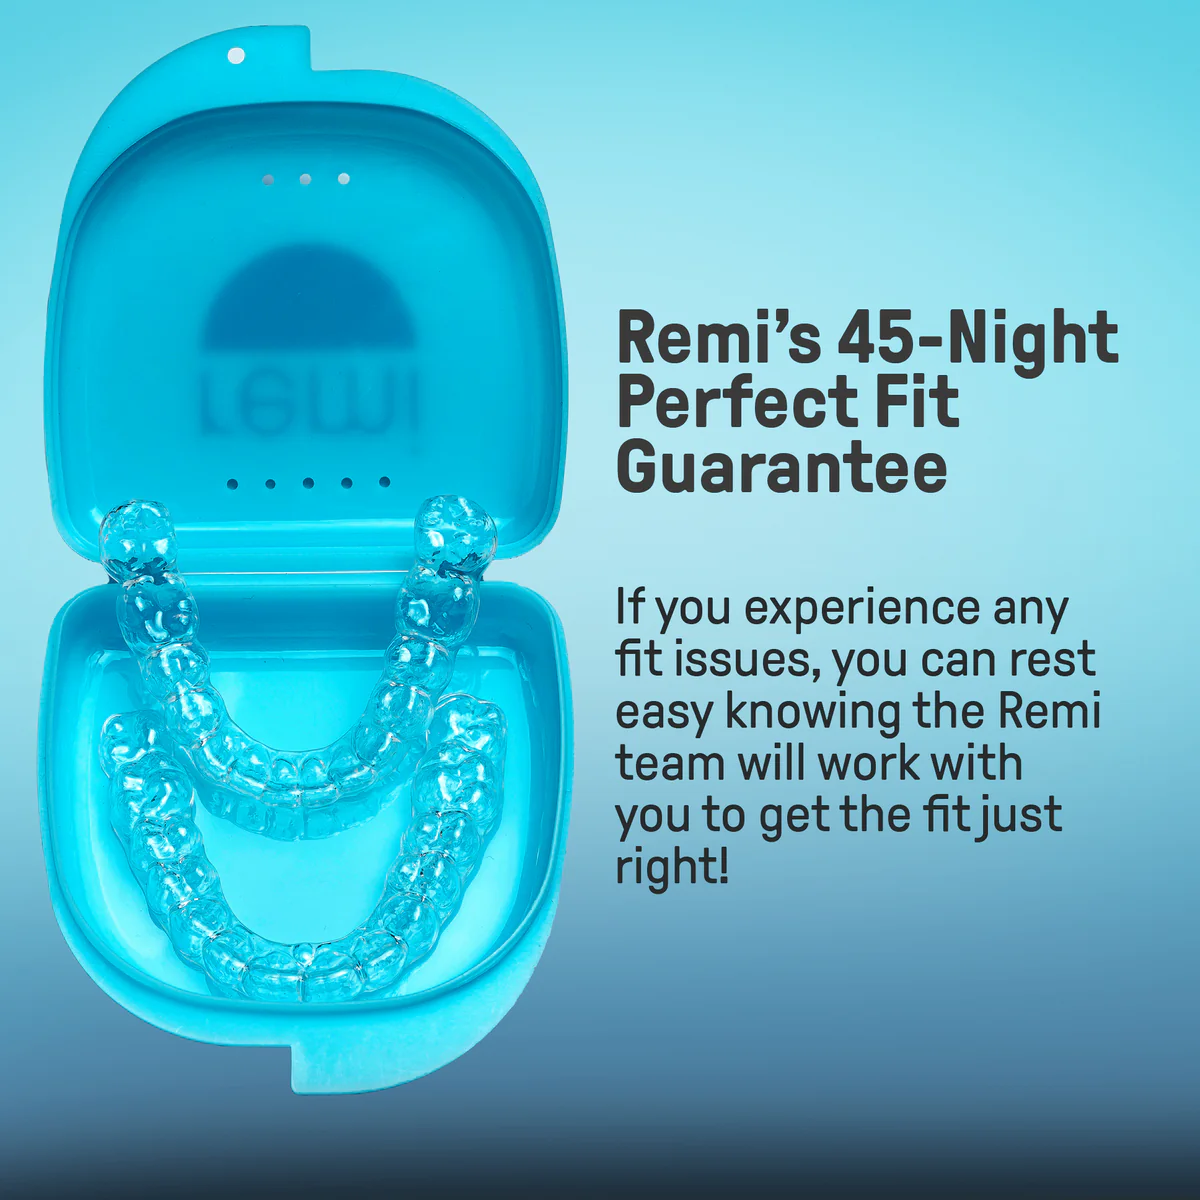 Remi offers 45 night perfect fit guarantee for retainers